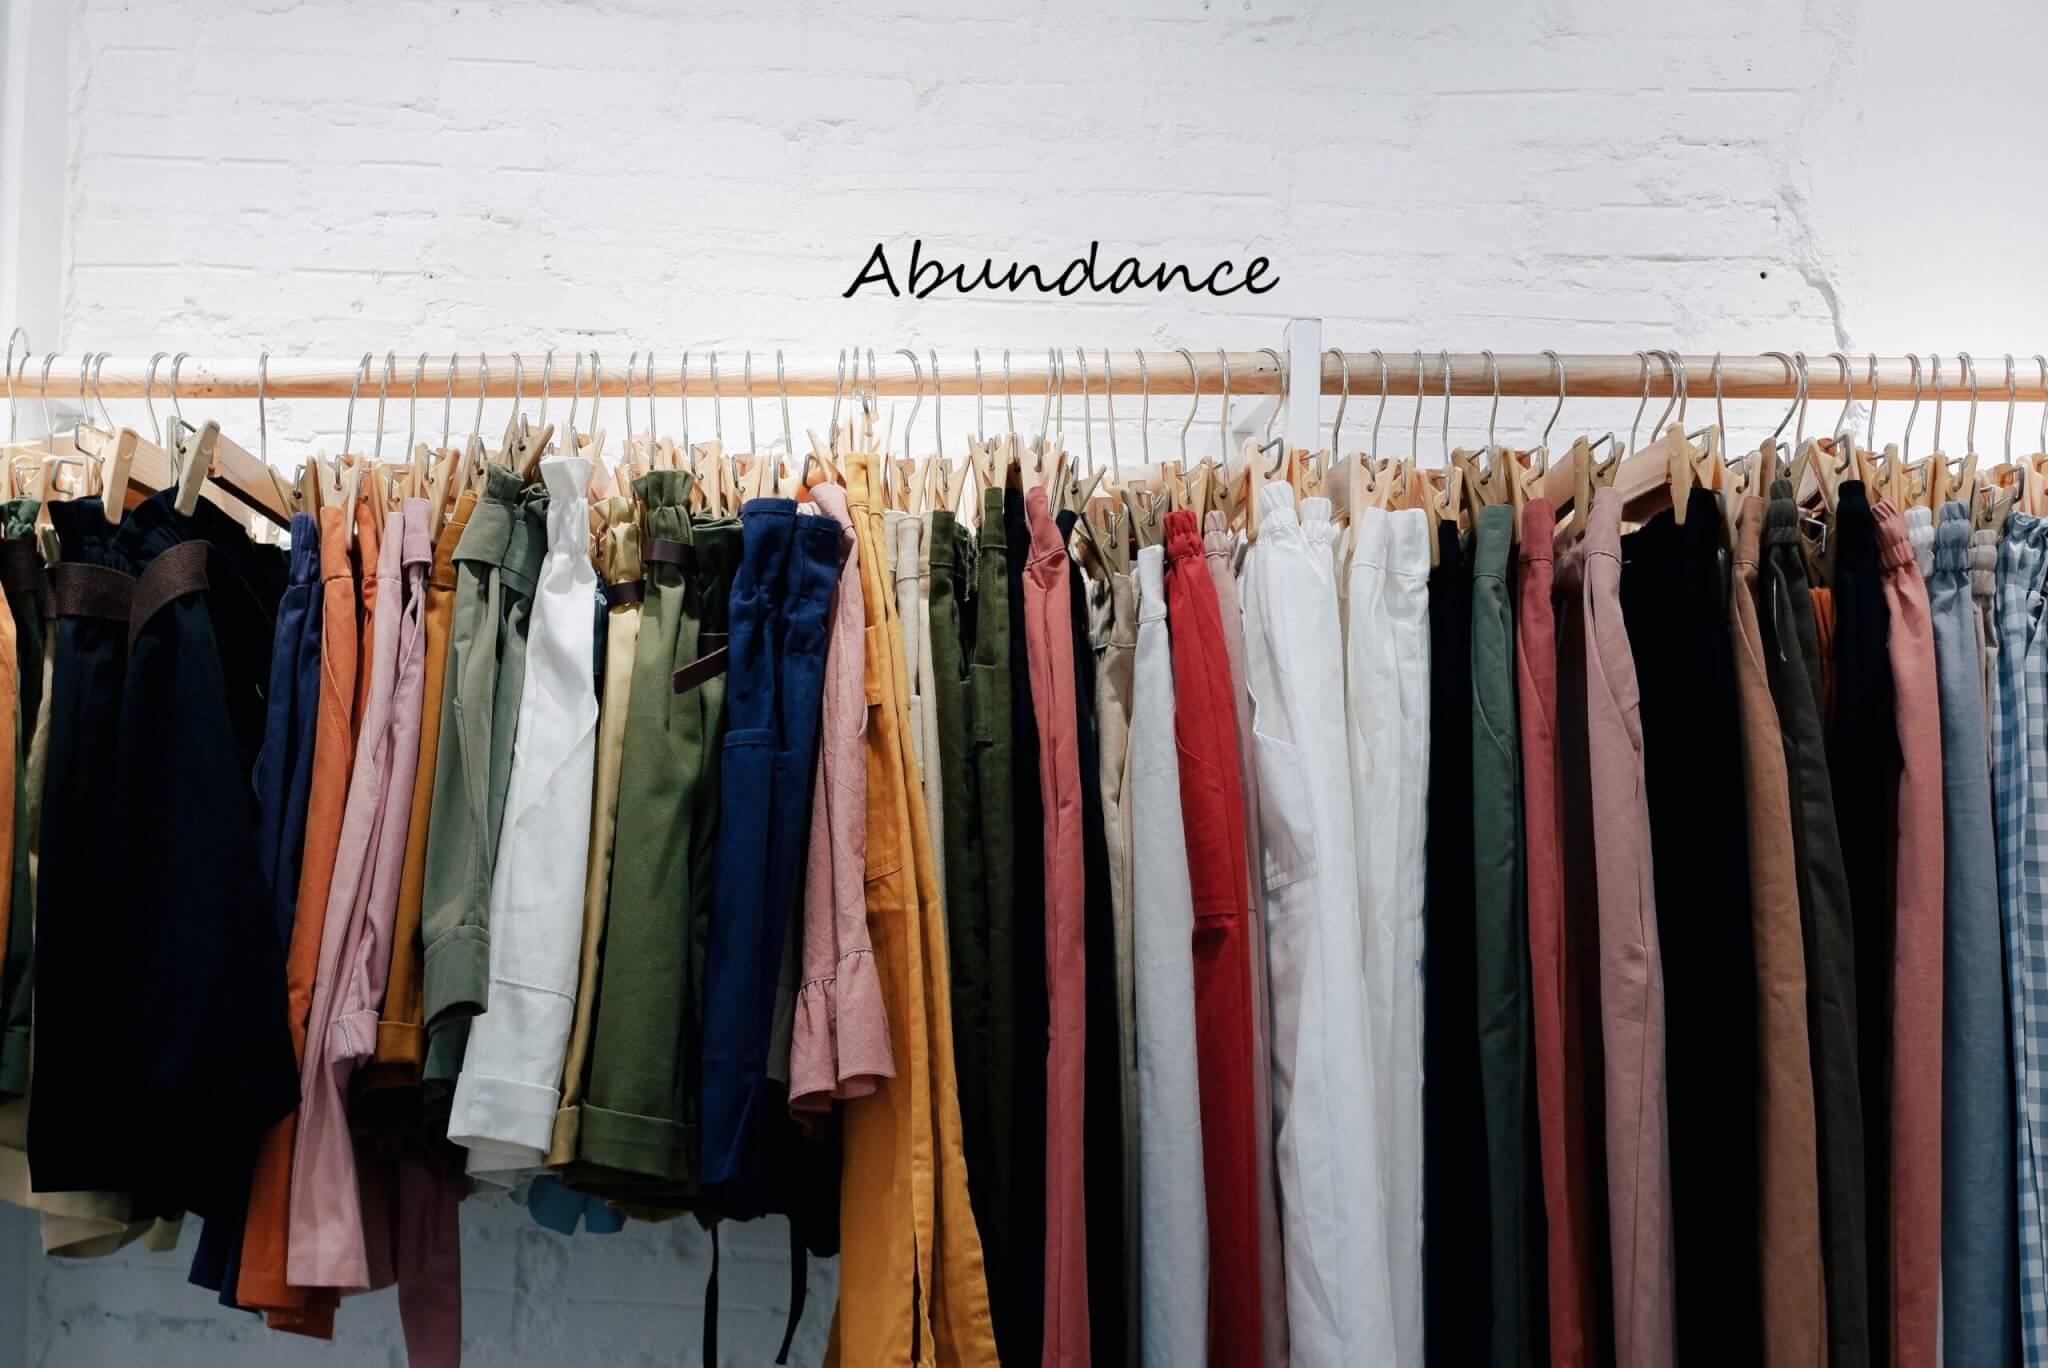 Wall-mounted rod crowded with harngars holding women's pants and shorts; white background with text reading "Abundance" - photo